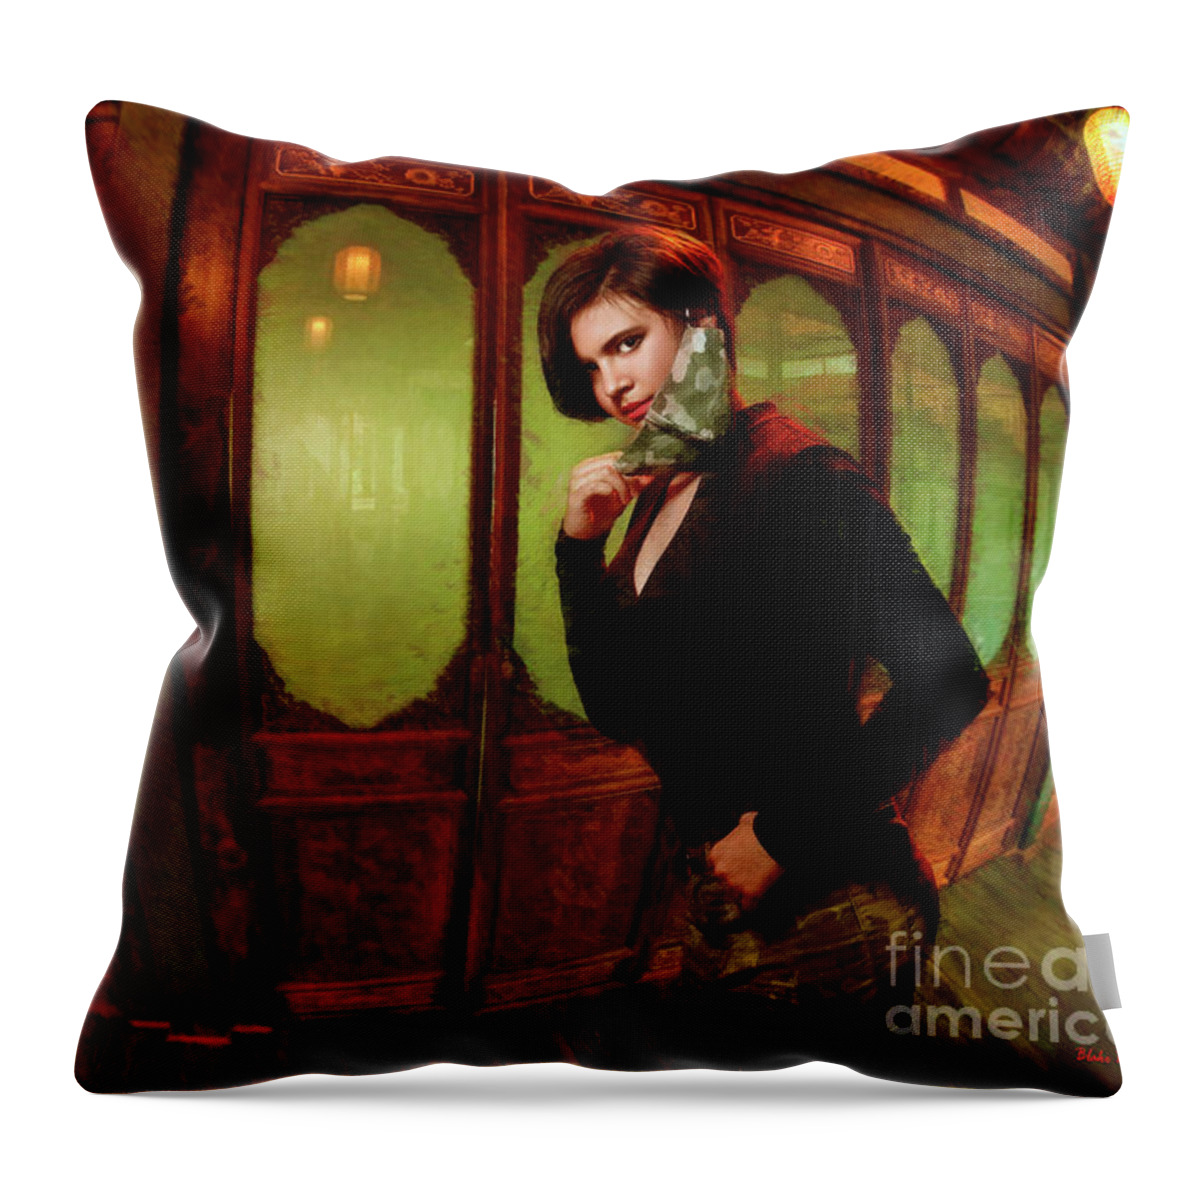  Throw Pillow featuring the photograph For You I Well Take Off My Mask by Blake Richards